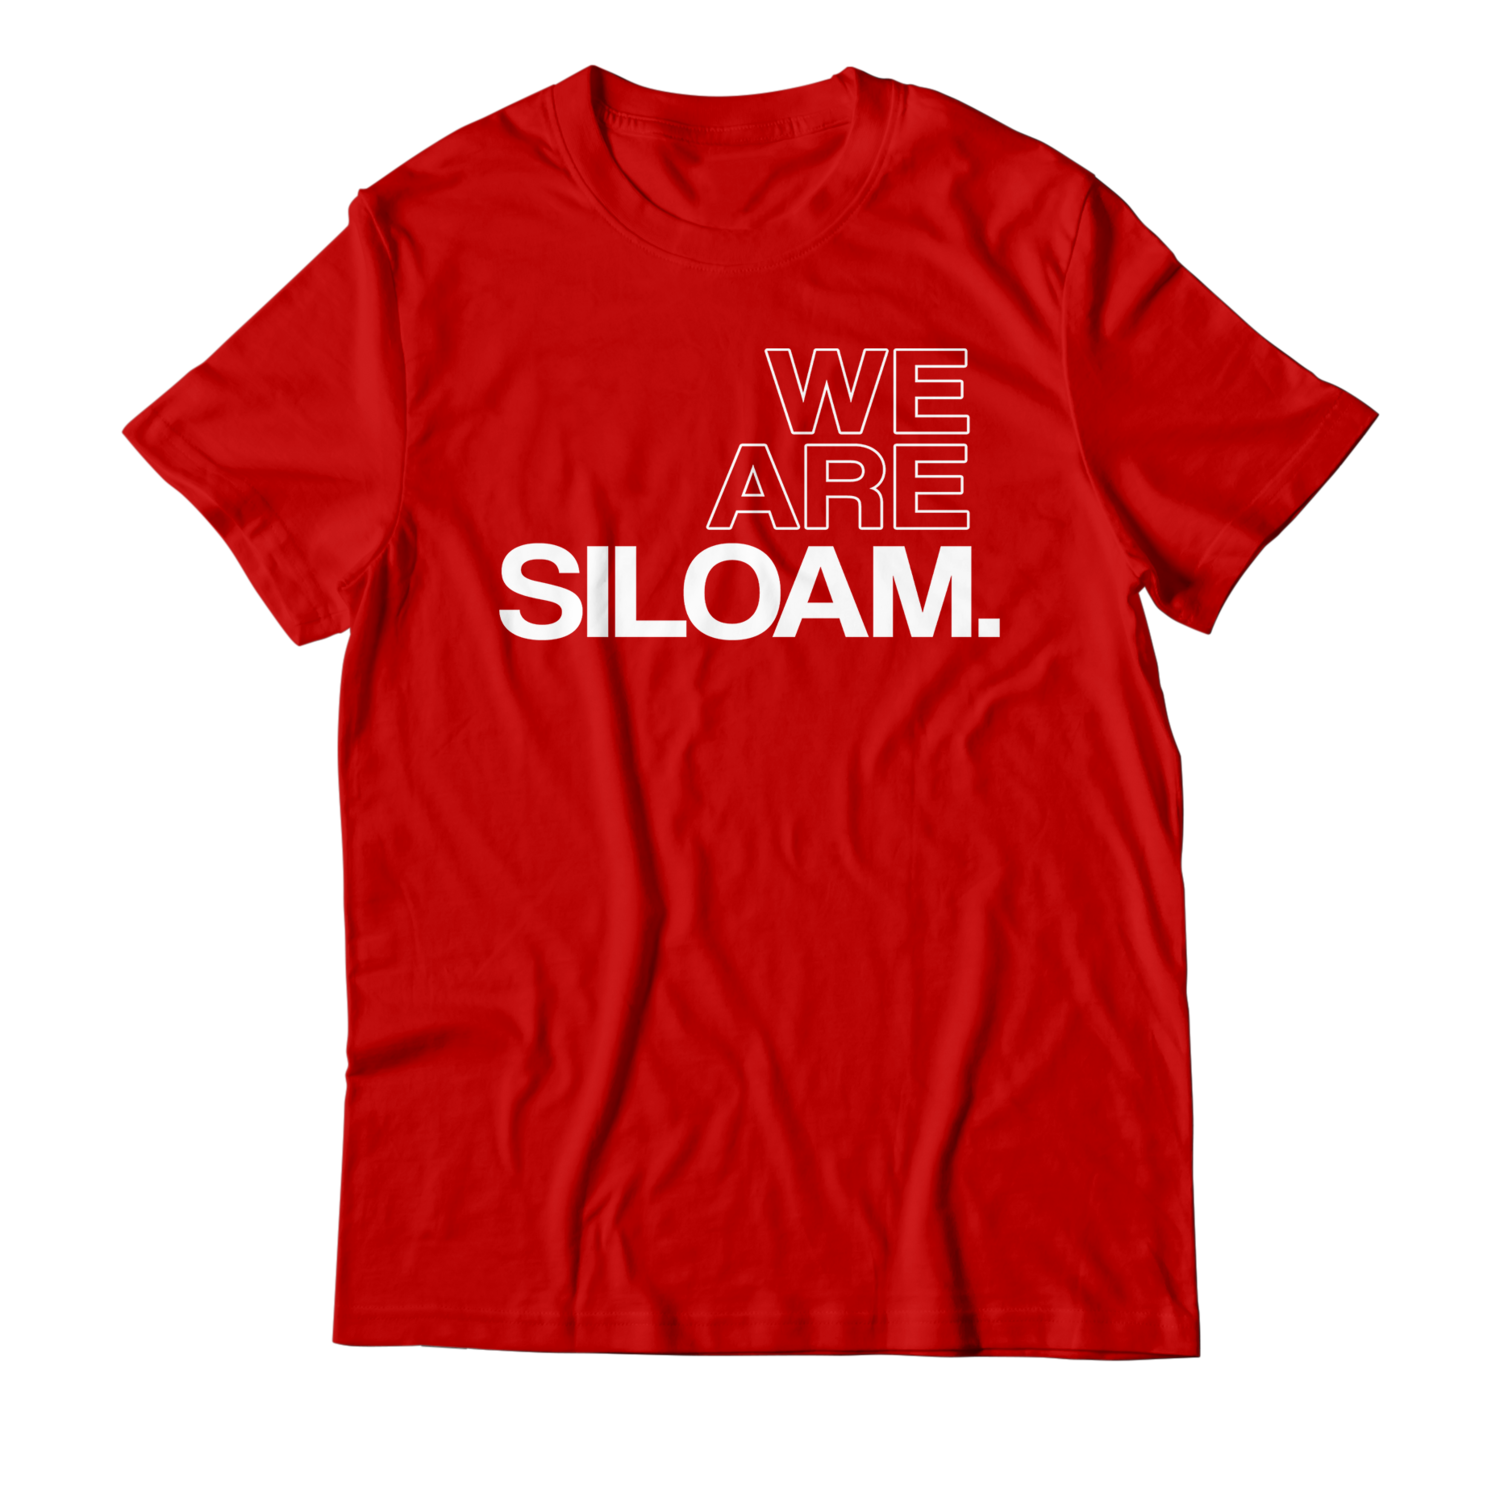 We Are Siloam T-shirt - Red & White